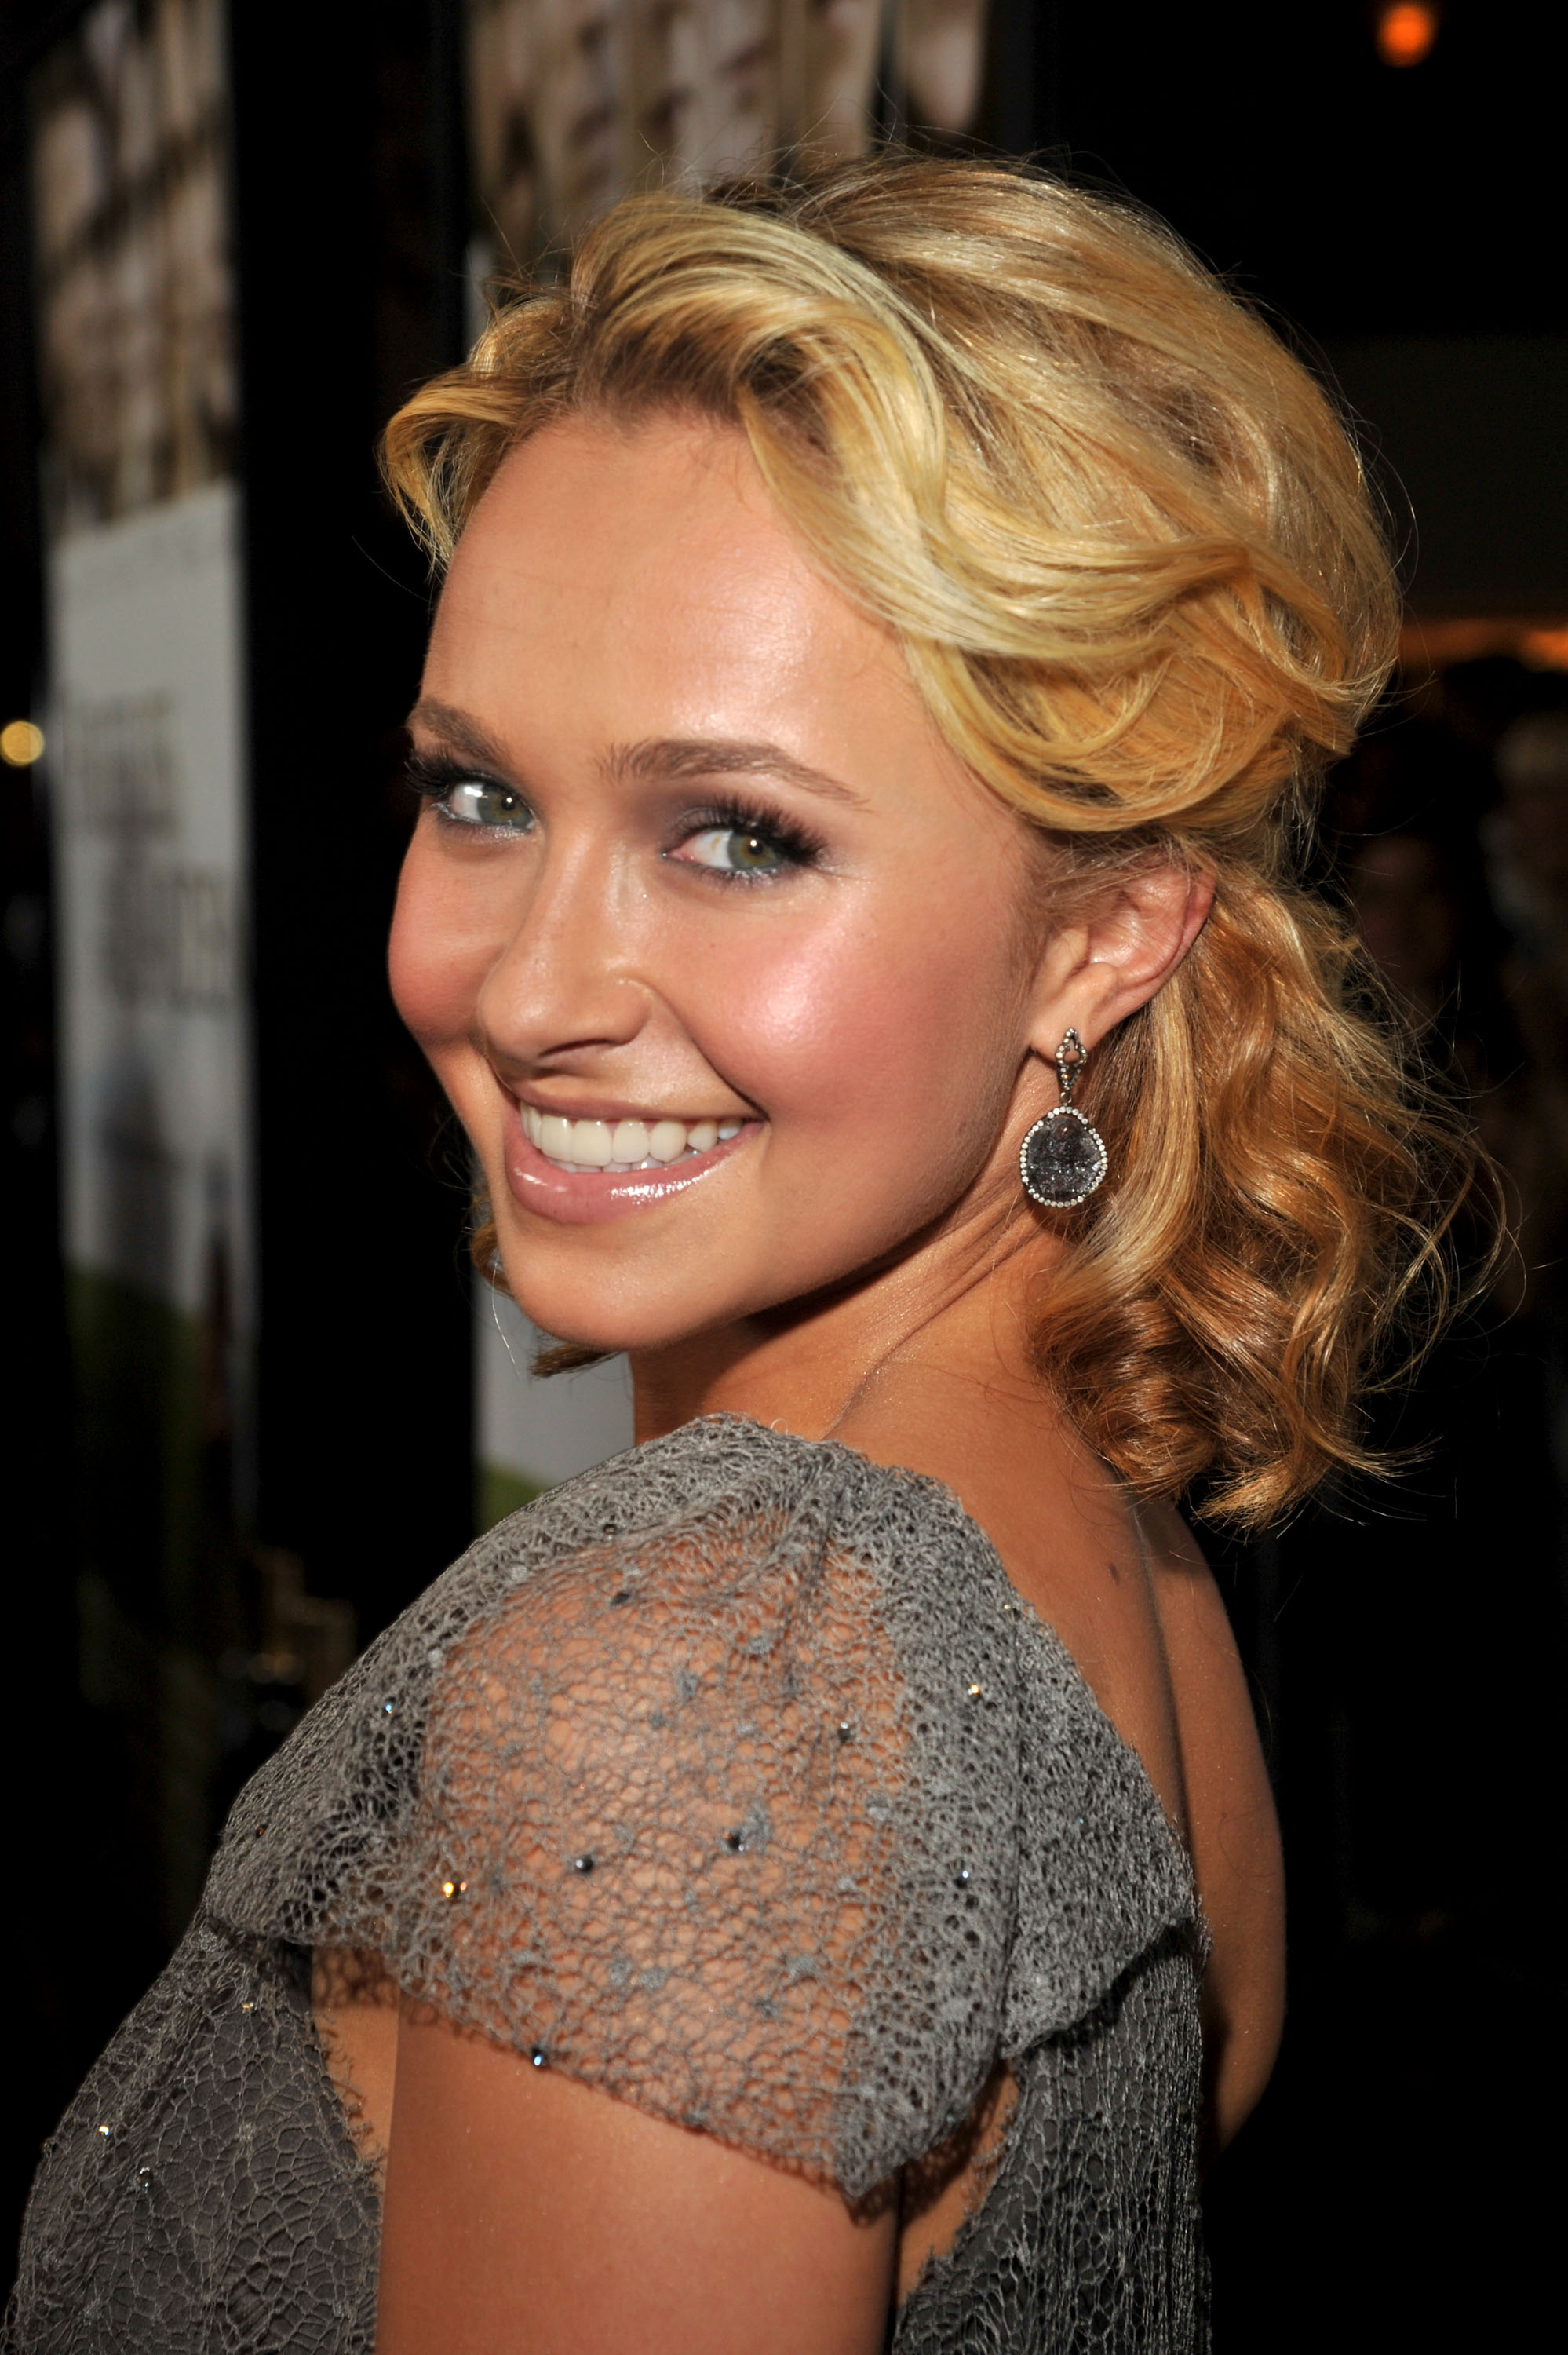 Hayden Panettiere arrives to the LA premiere of _Fireflies in the Garden_ in Pacific Theatre at The Grove on October 12, 2011